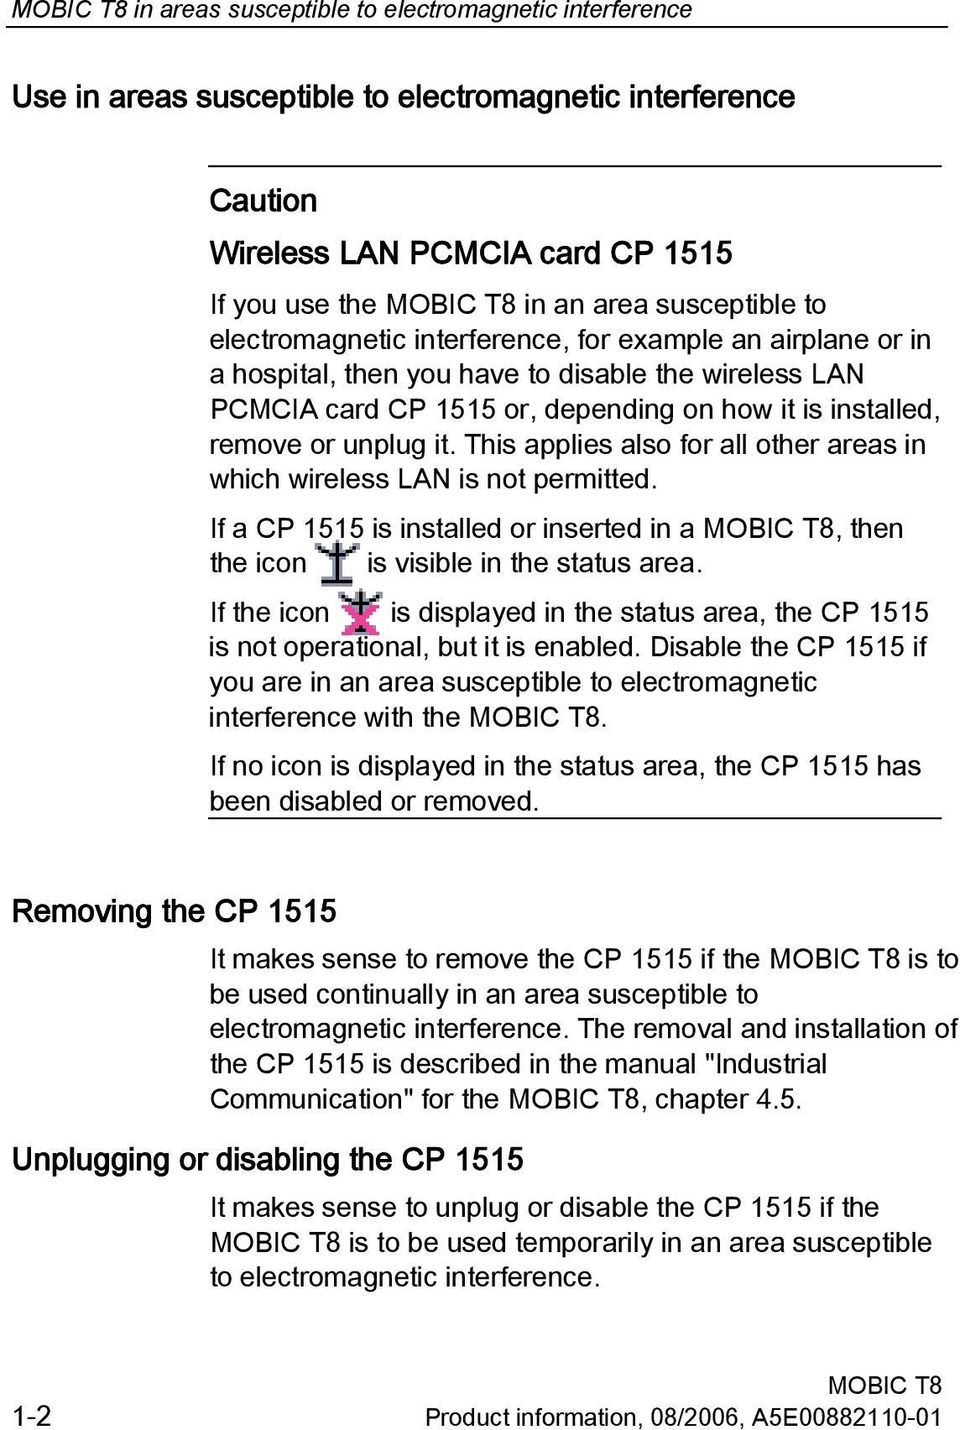 This applies also for all other areas in which wireless LAN is not permitted. If a CP 1515 is installed or inserted in a, then the icon is visible in the status area.